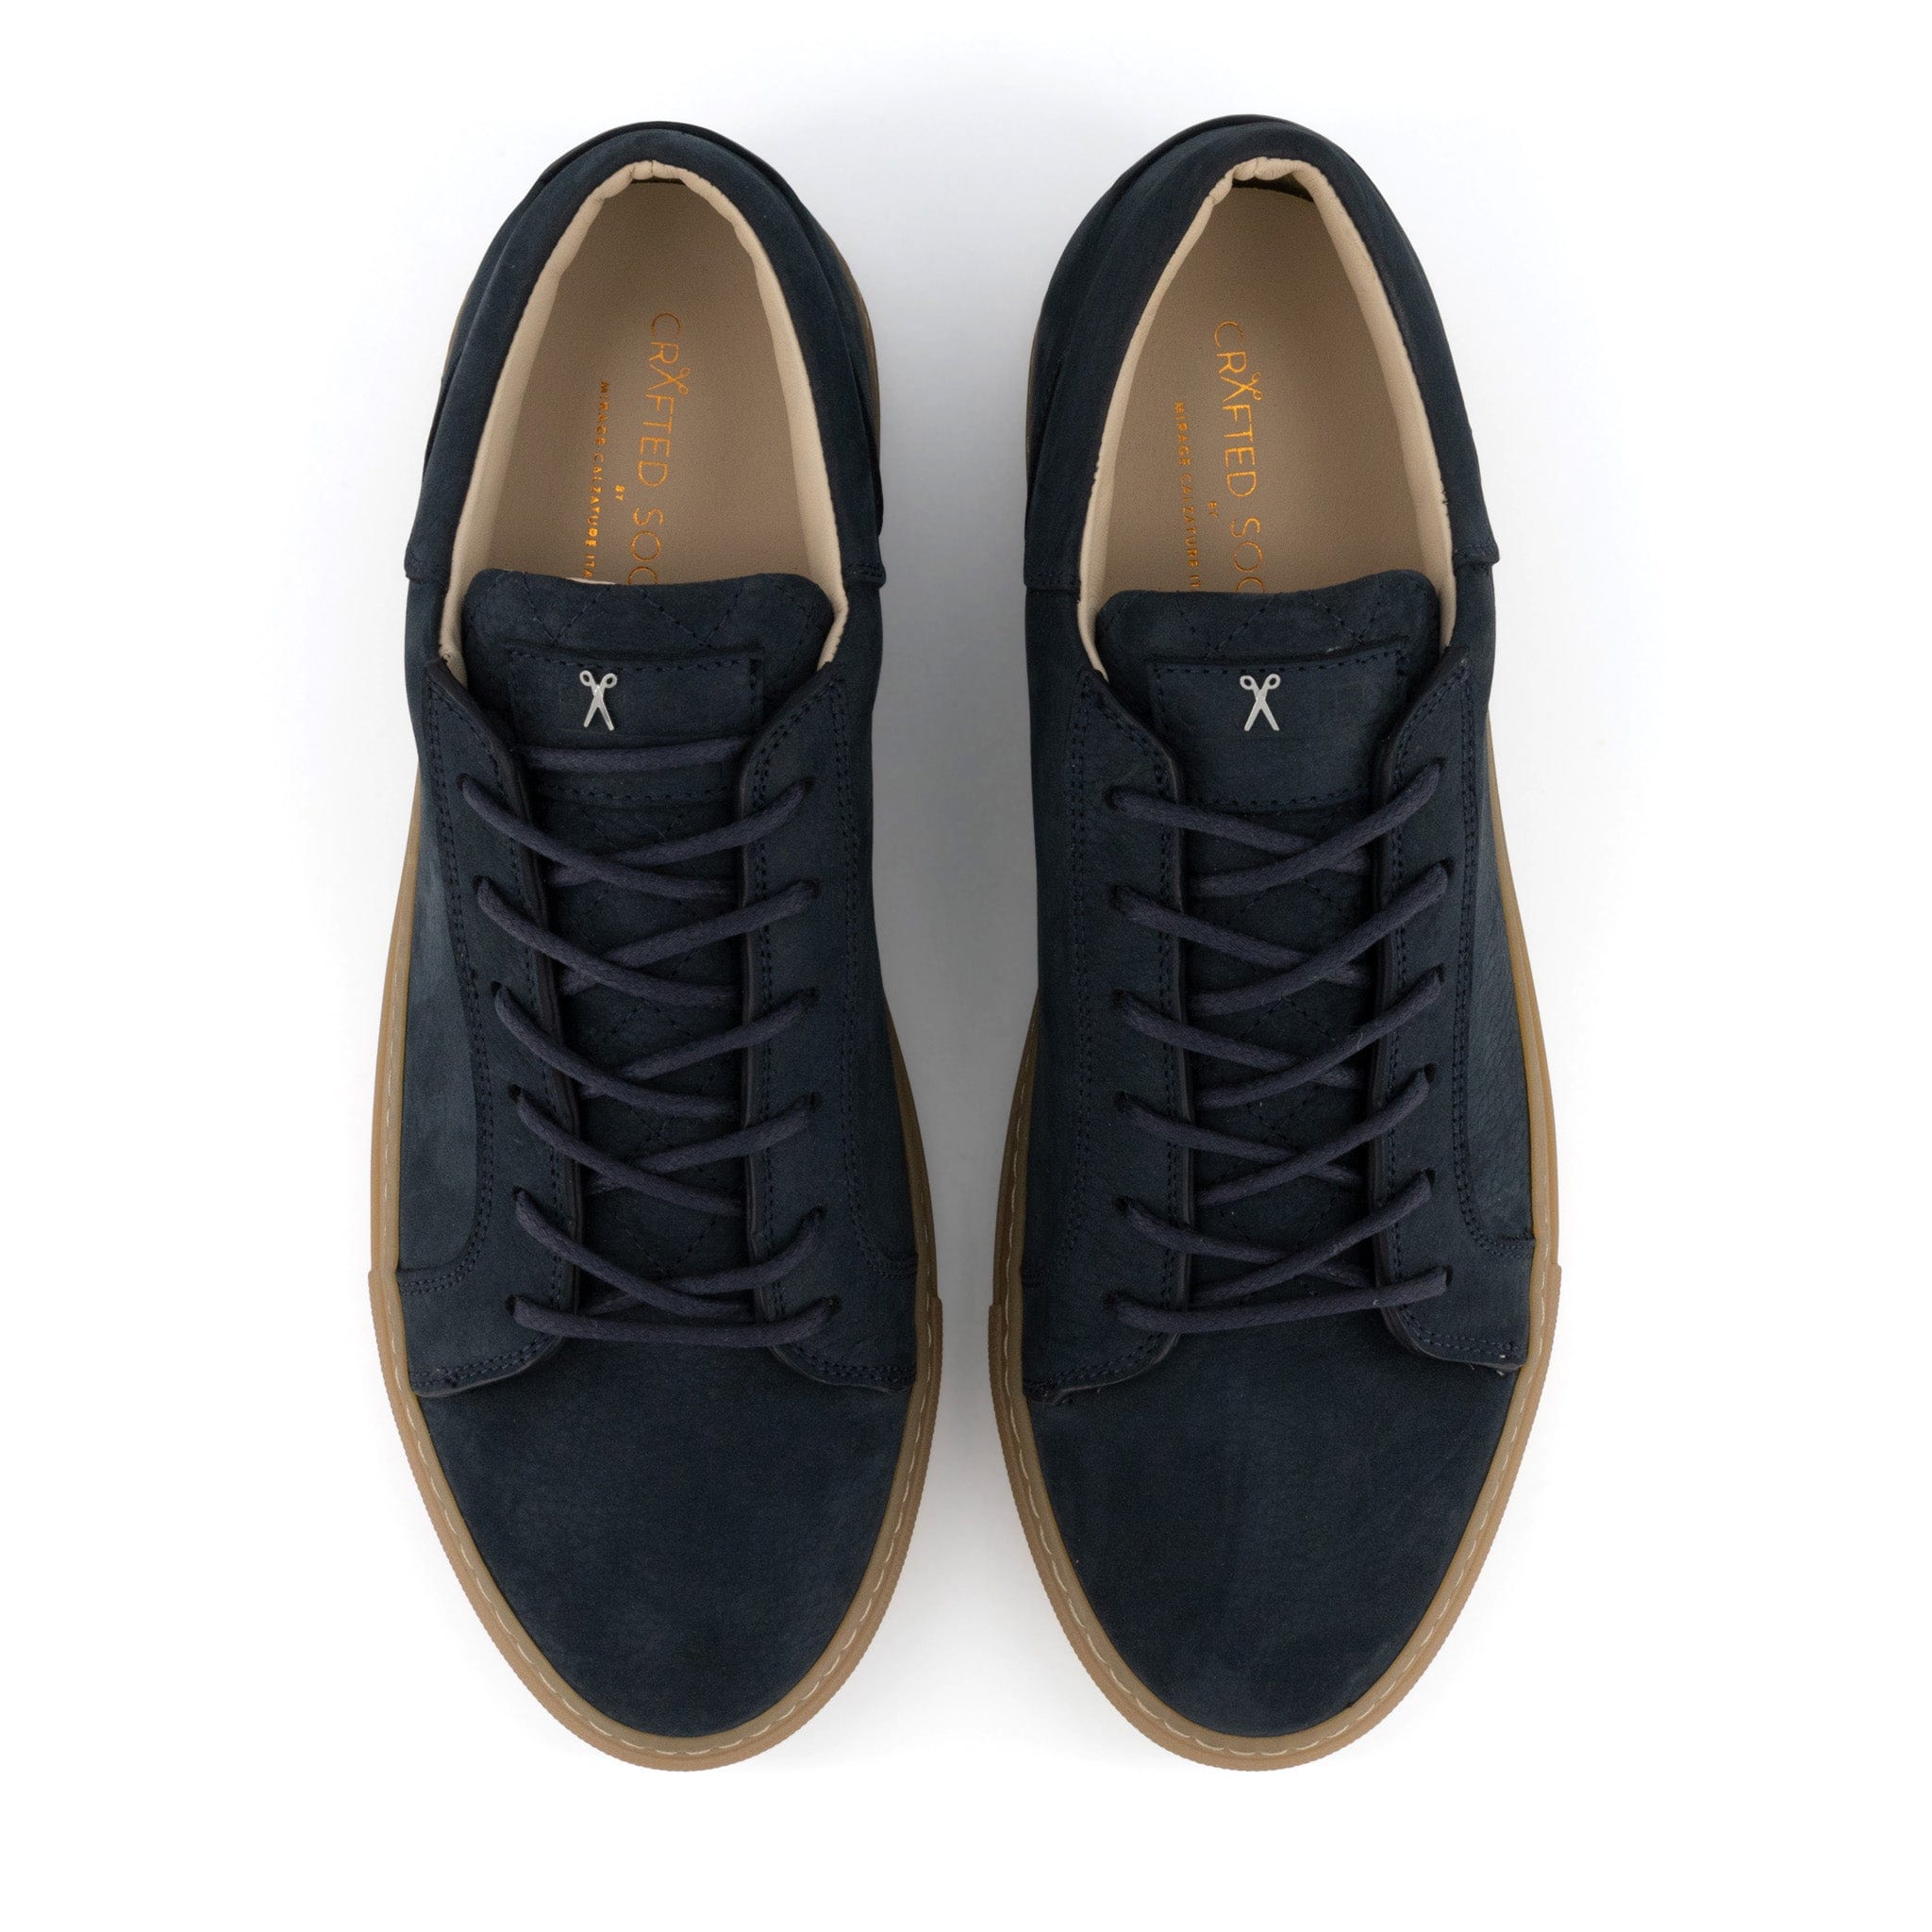 Mario Low Refined Sneaker | Navy Nubuck | Gum Rubber Outsole | Made in Italy